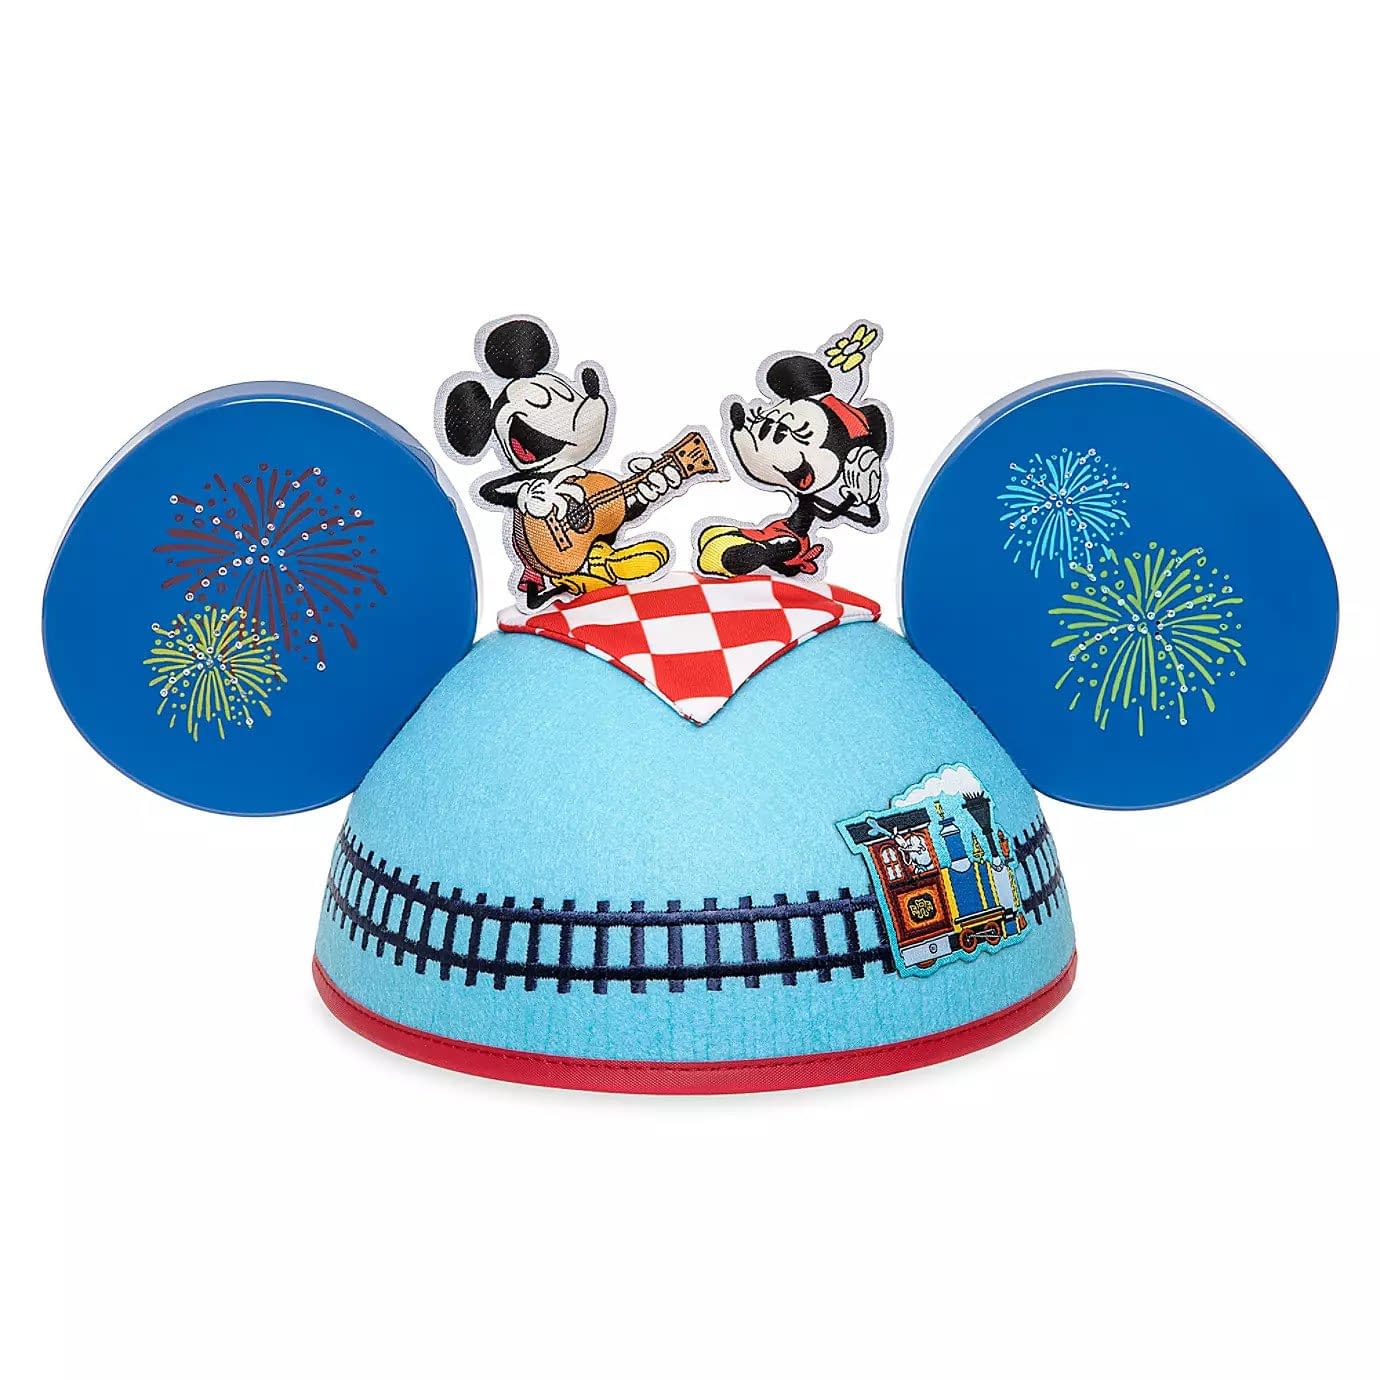 5 Must Have Items to Celebrate Mickey and Minnie's Runaway Railway in Walt Disney World!